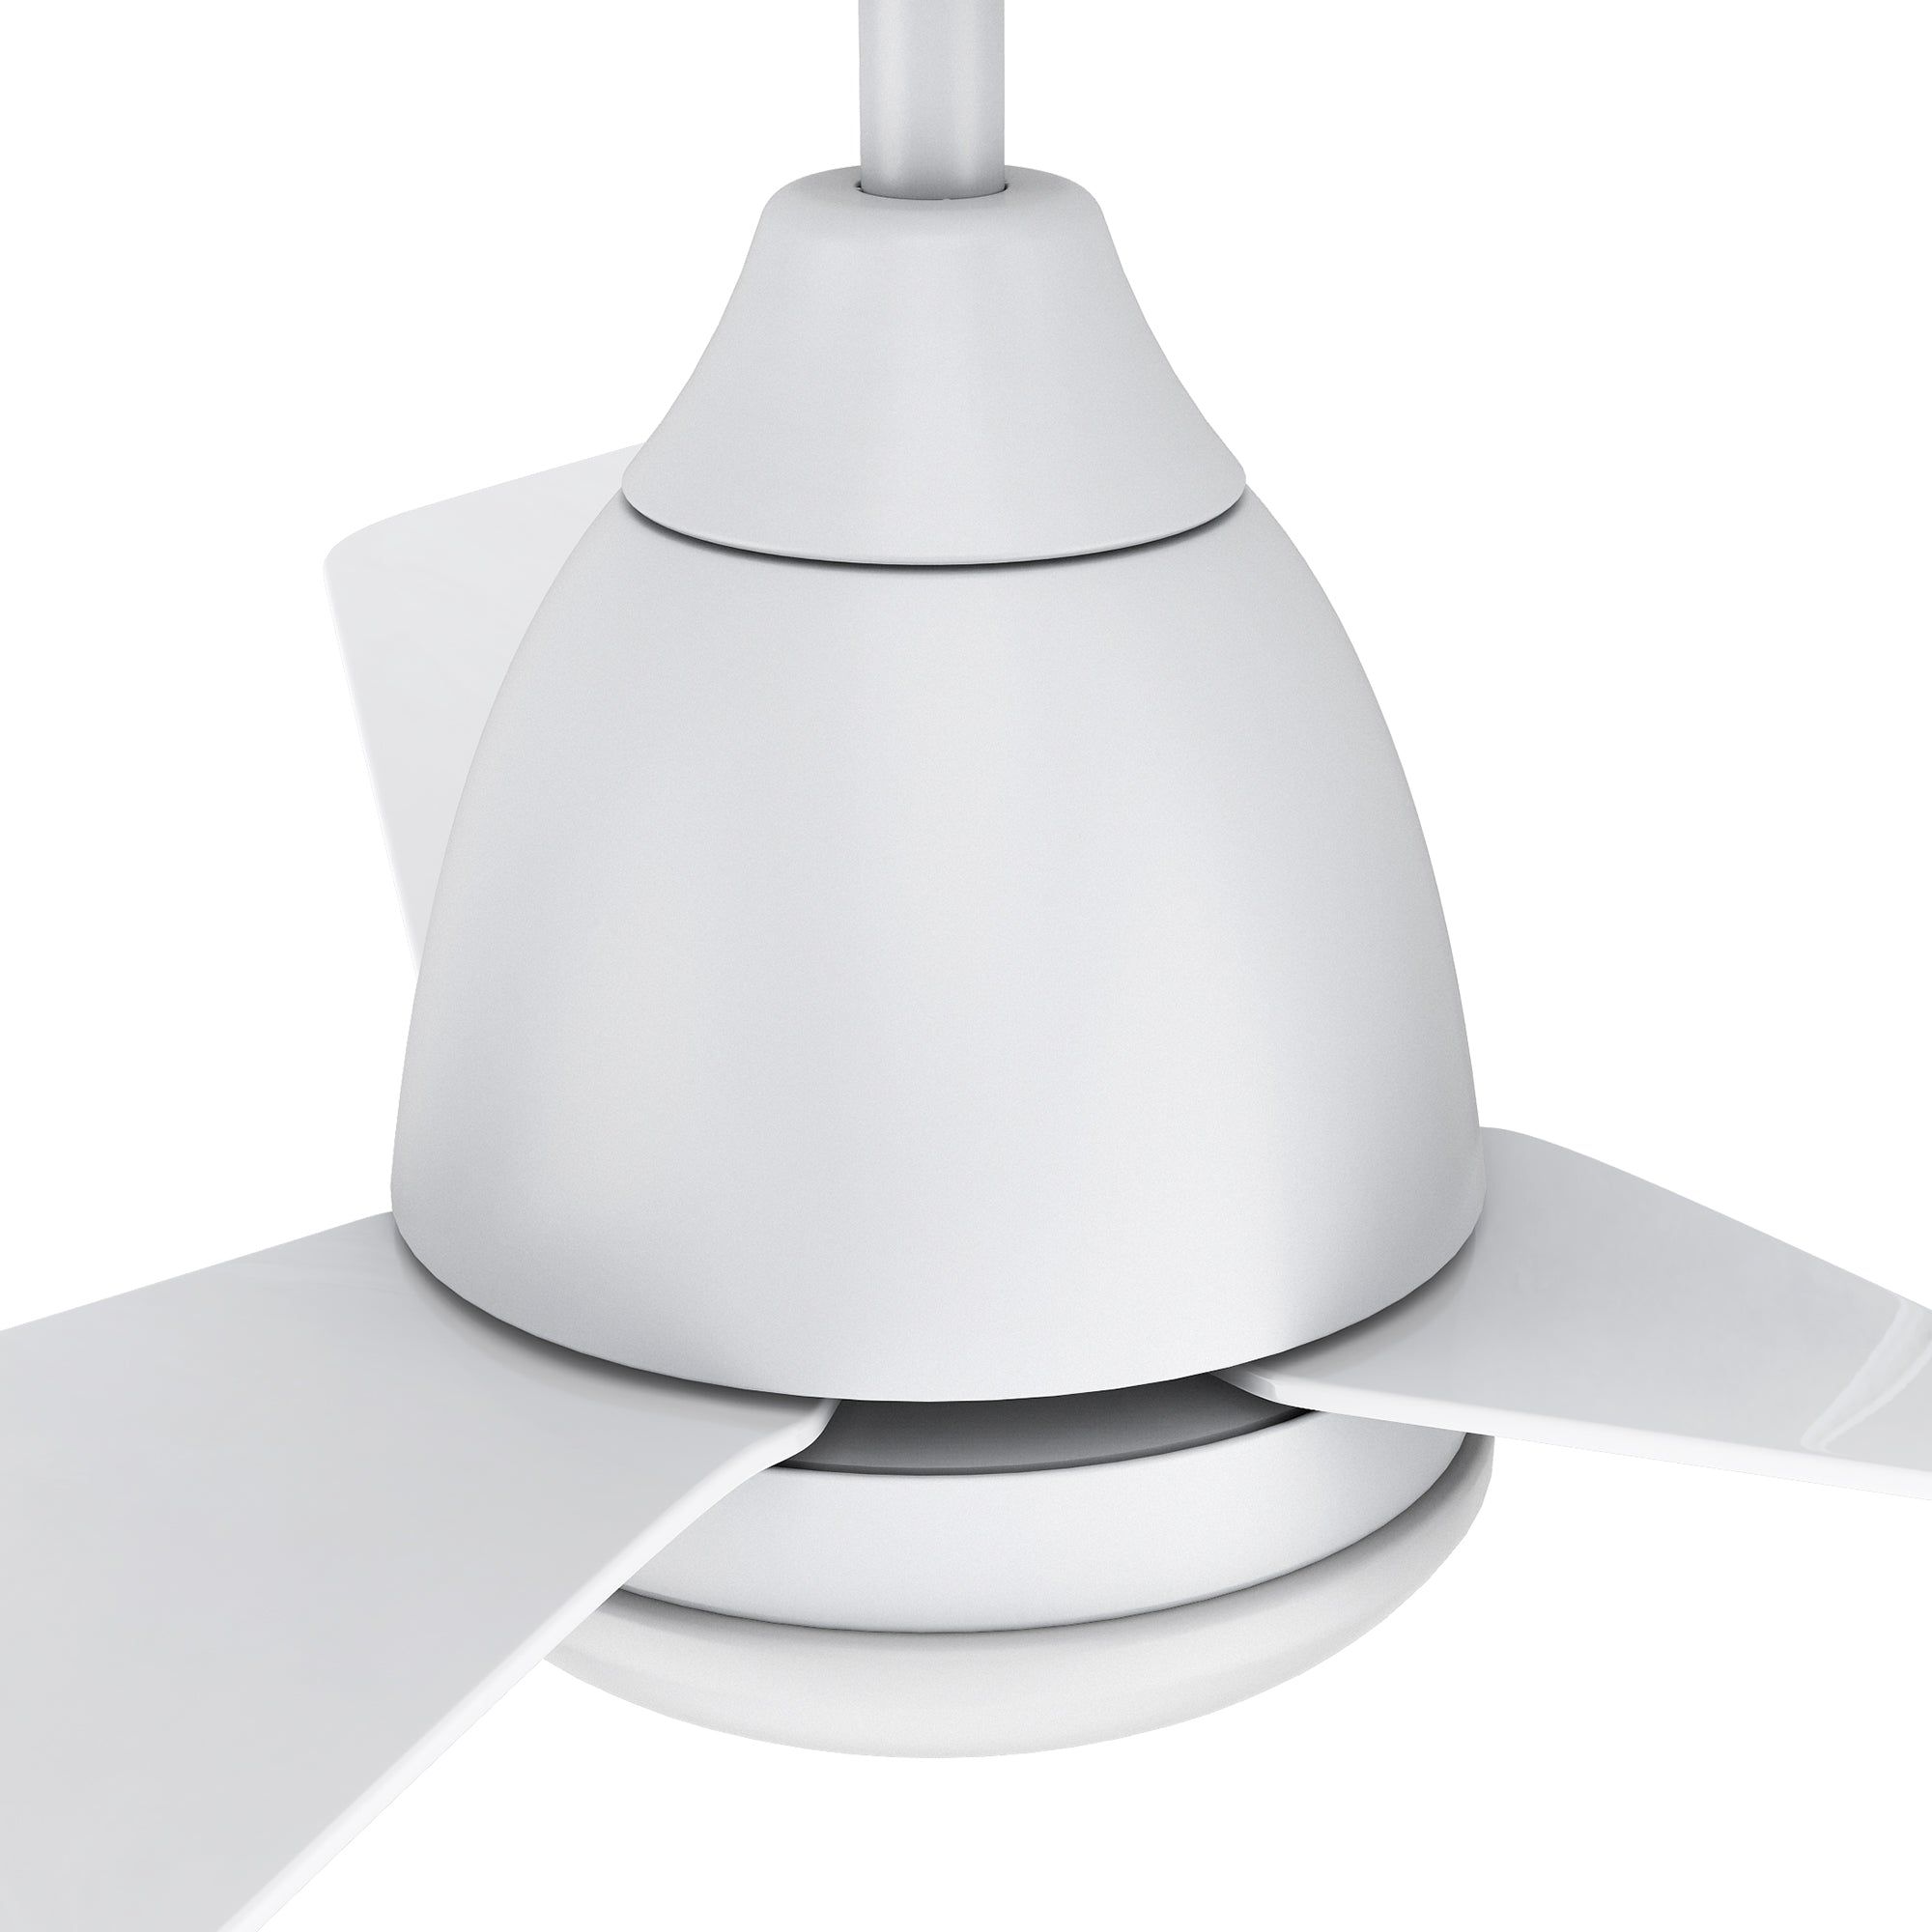 This Silas 44'' smart ceiling fan keeps your space cool, bright, and stylish. It is a soft modern masterpiece perfect for your indoor living spaces. This Wifi smart ceiling fan is a simplicity designing with White finish, use very strong ABS blades and has an integrated 4000K LED cool light. The fan features Remote control, Wi-Fi apps, Siri Shortcut and Voice control technology (compatible with Amazon Alexa and Google Home Assistant ) to set fan preferences.